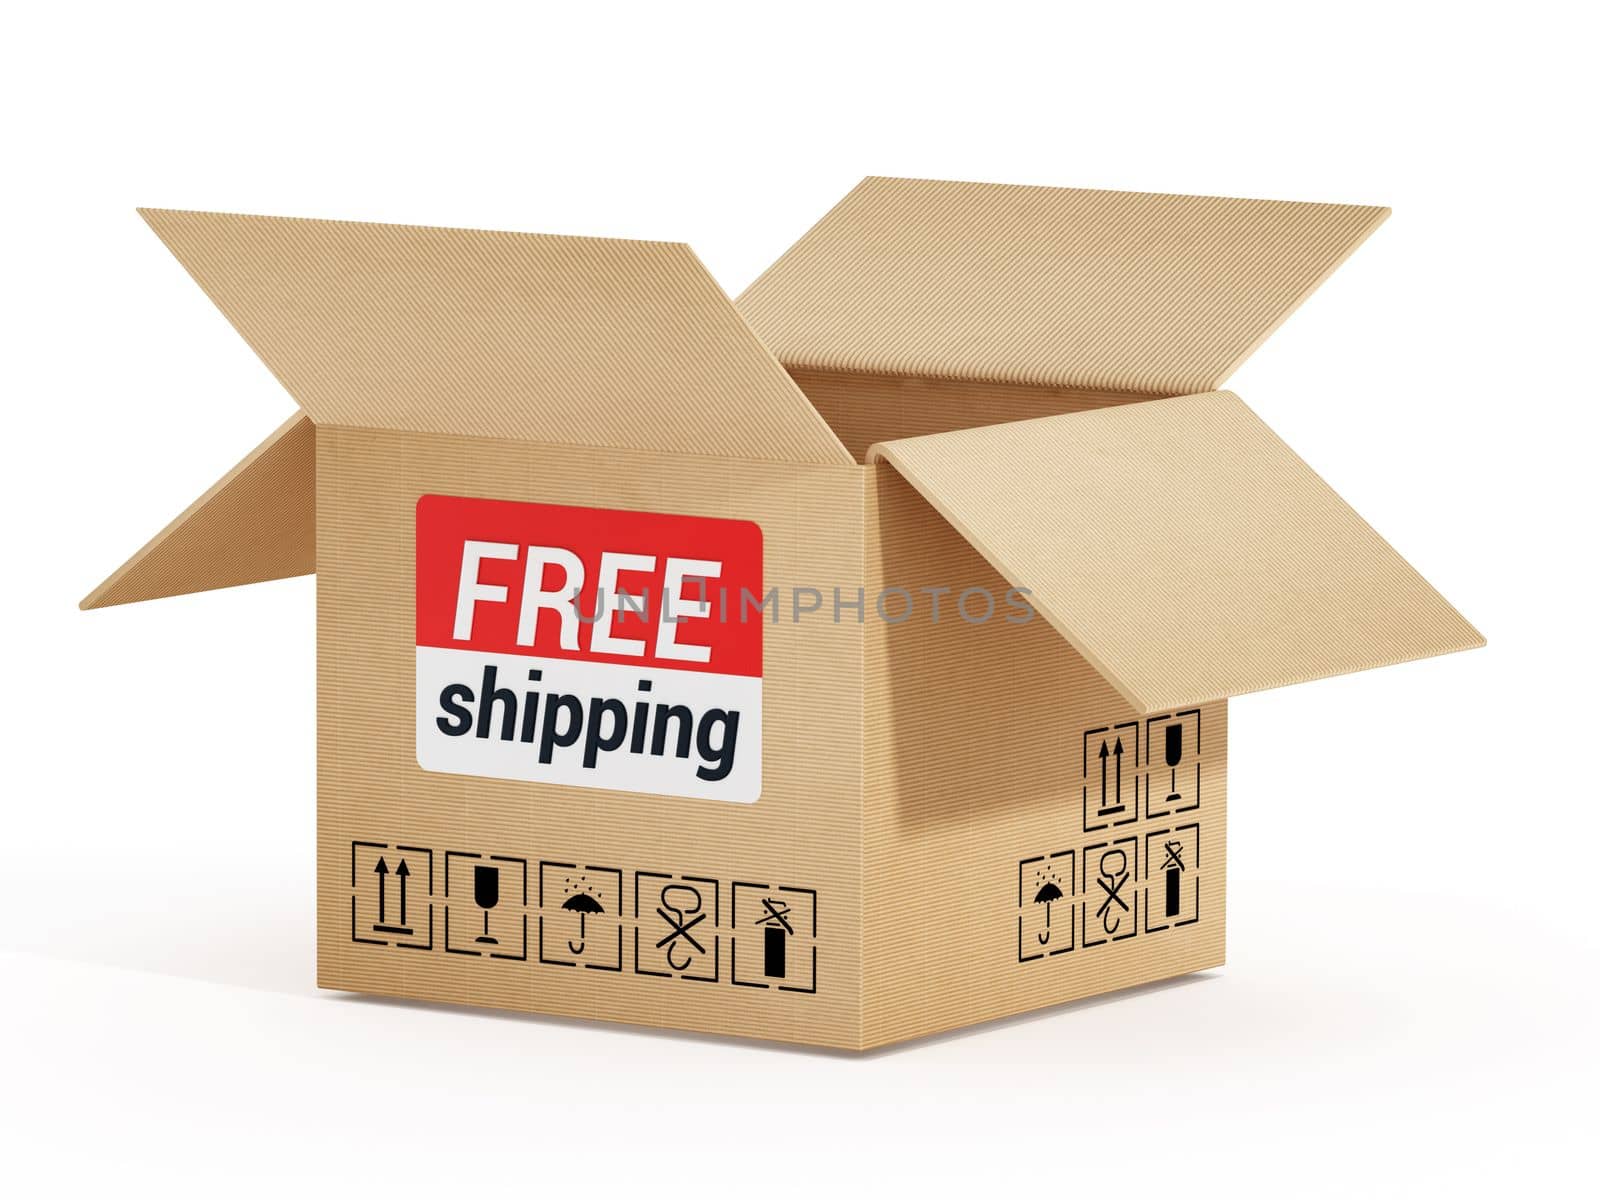 Cardboard box with free shipping text isolated on white background. 3D illustration.